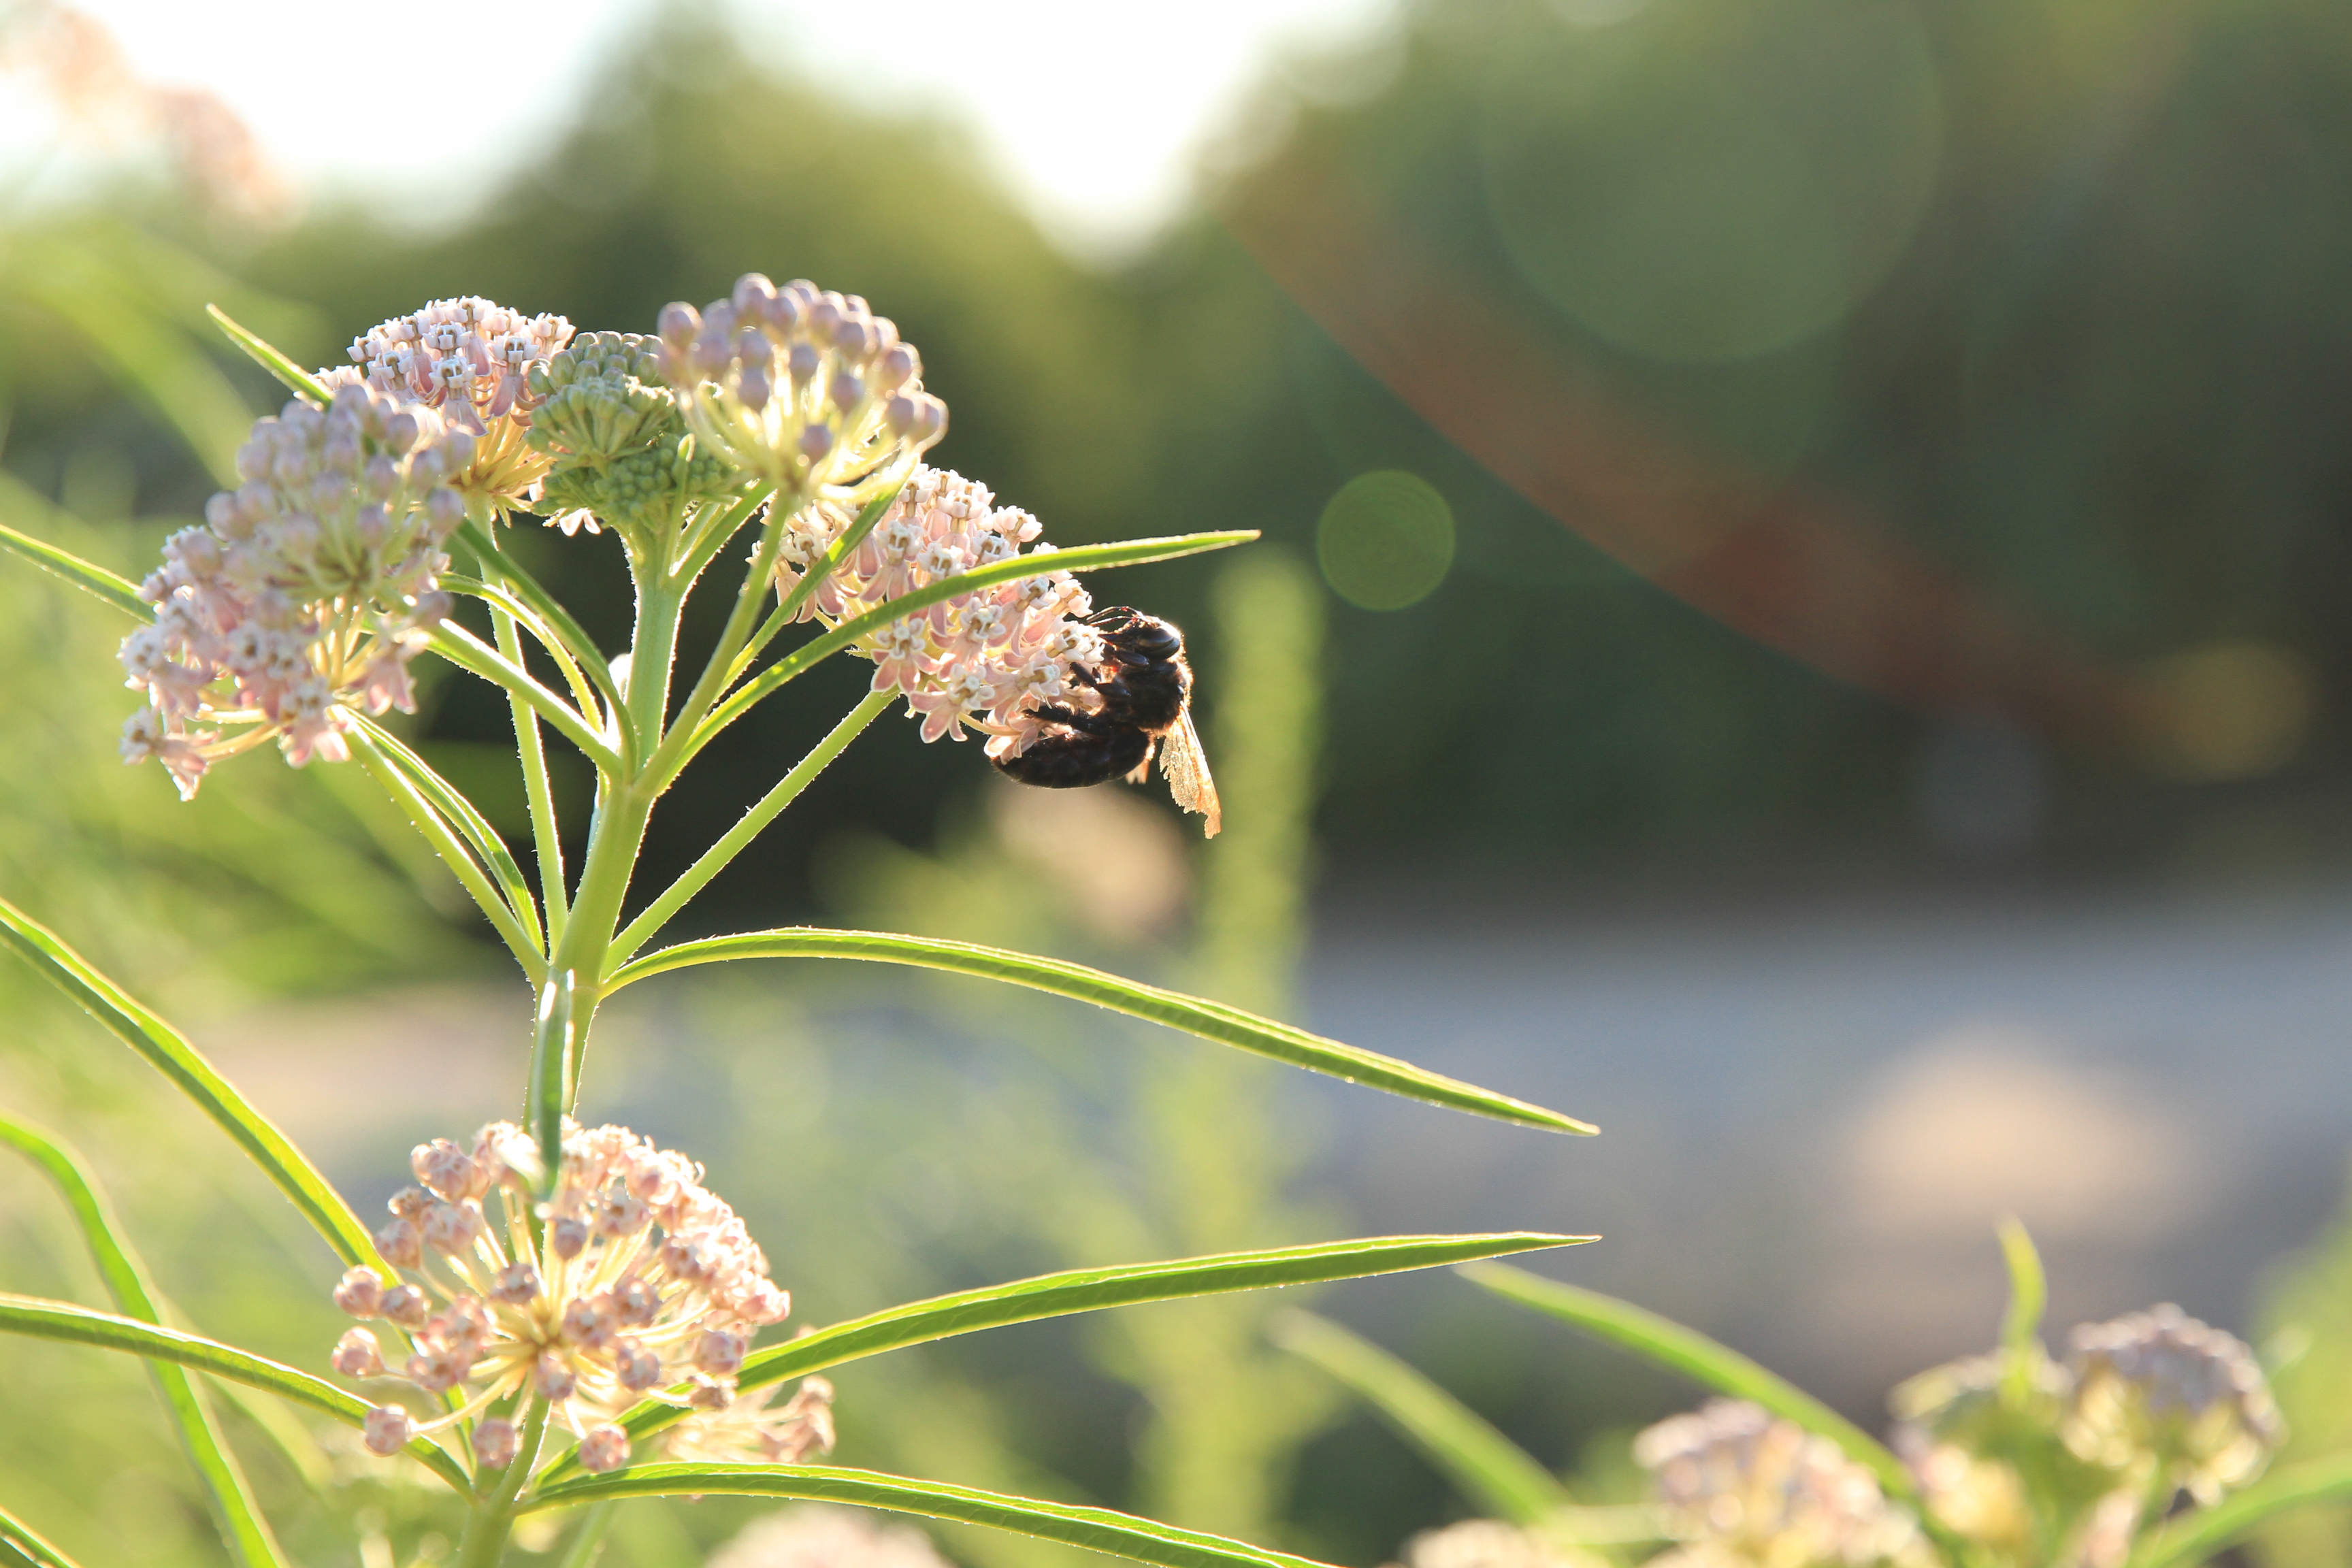 A dark-colored bee perches on the edge of a cluster of pink flowers, on a plant with long, thin, green leaves. The lighting in this scene is atmospheric, conveying sunny and warm weather.